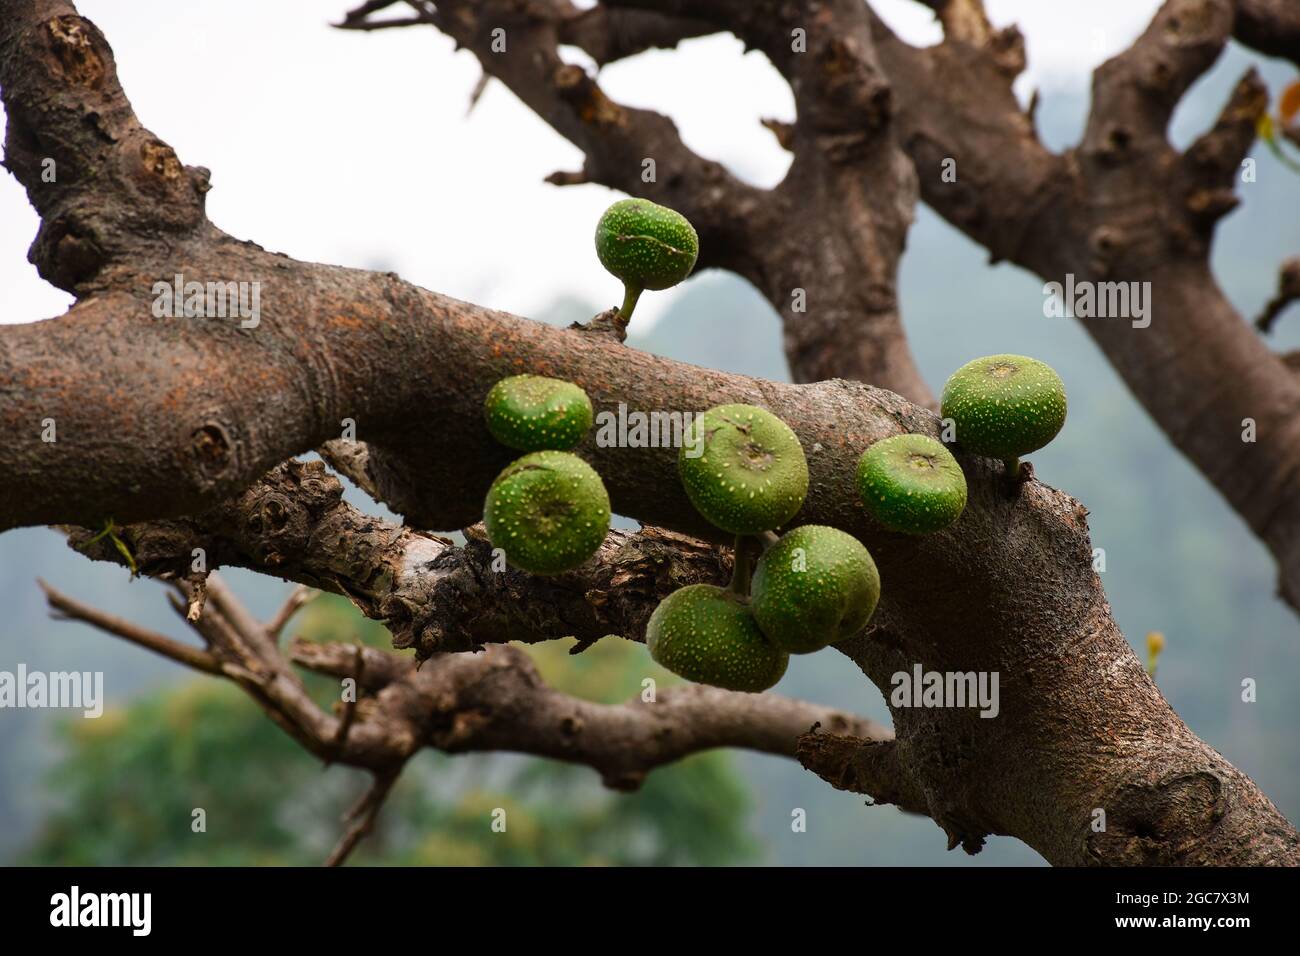 Ficus racemosa commonly known as the cluster fig, red river fig or gular is a species of plant in the family Moraceae. Stock Photo